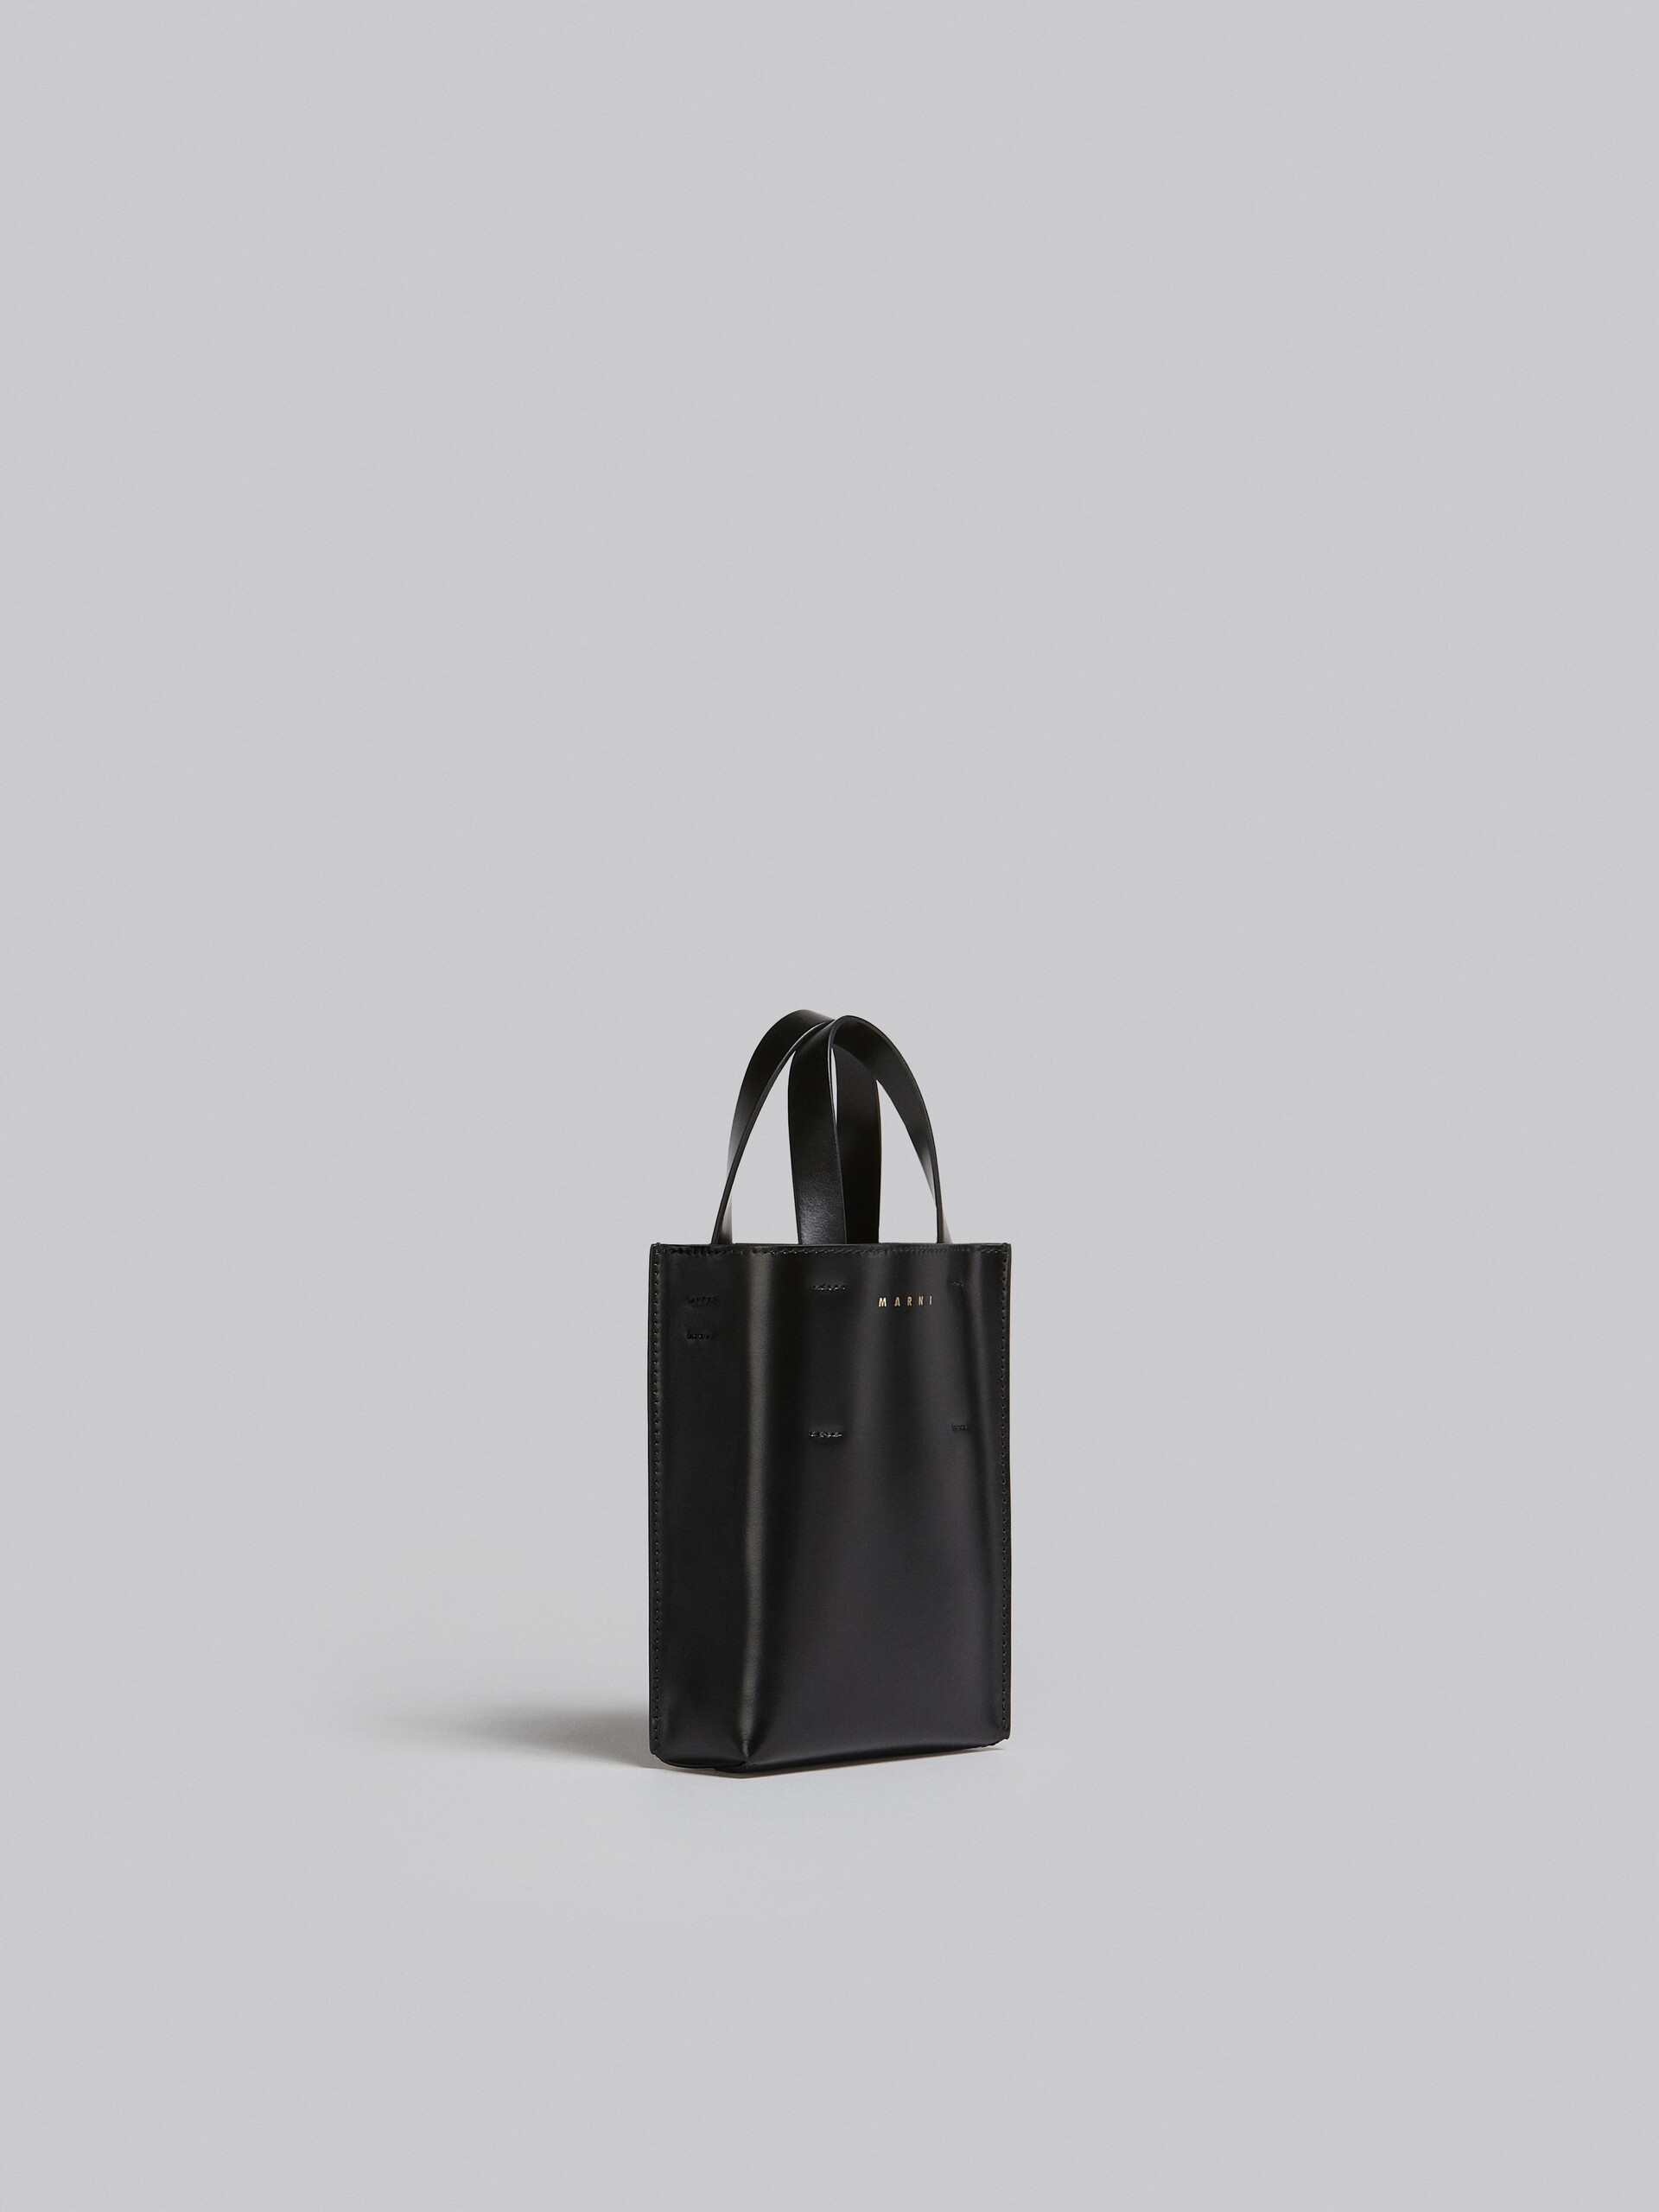 MUSEO nano bag in black leather - Shopping Bags - Image 5